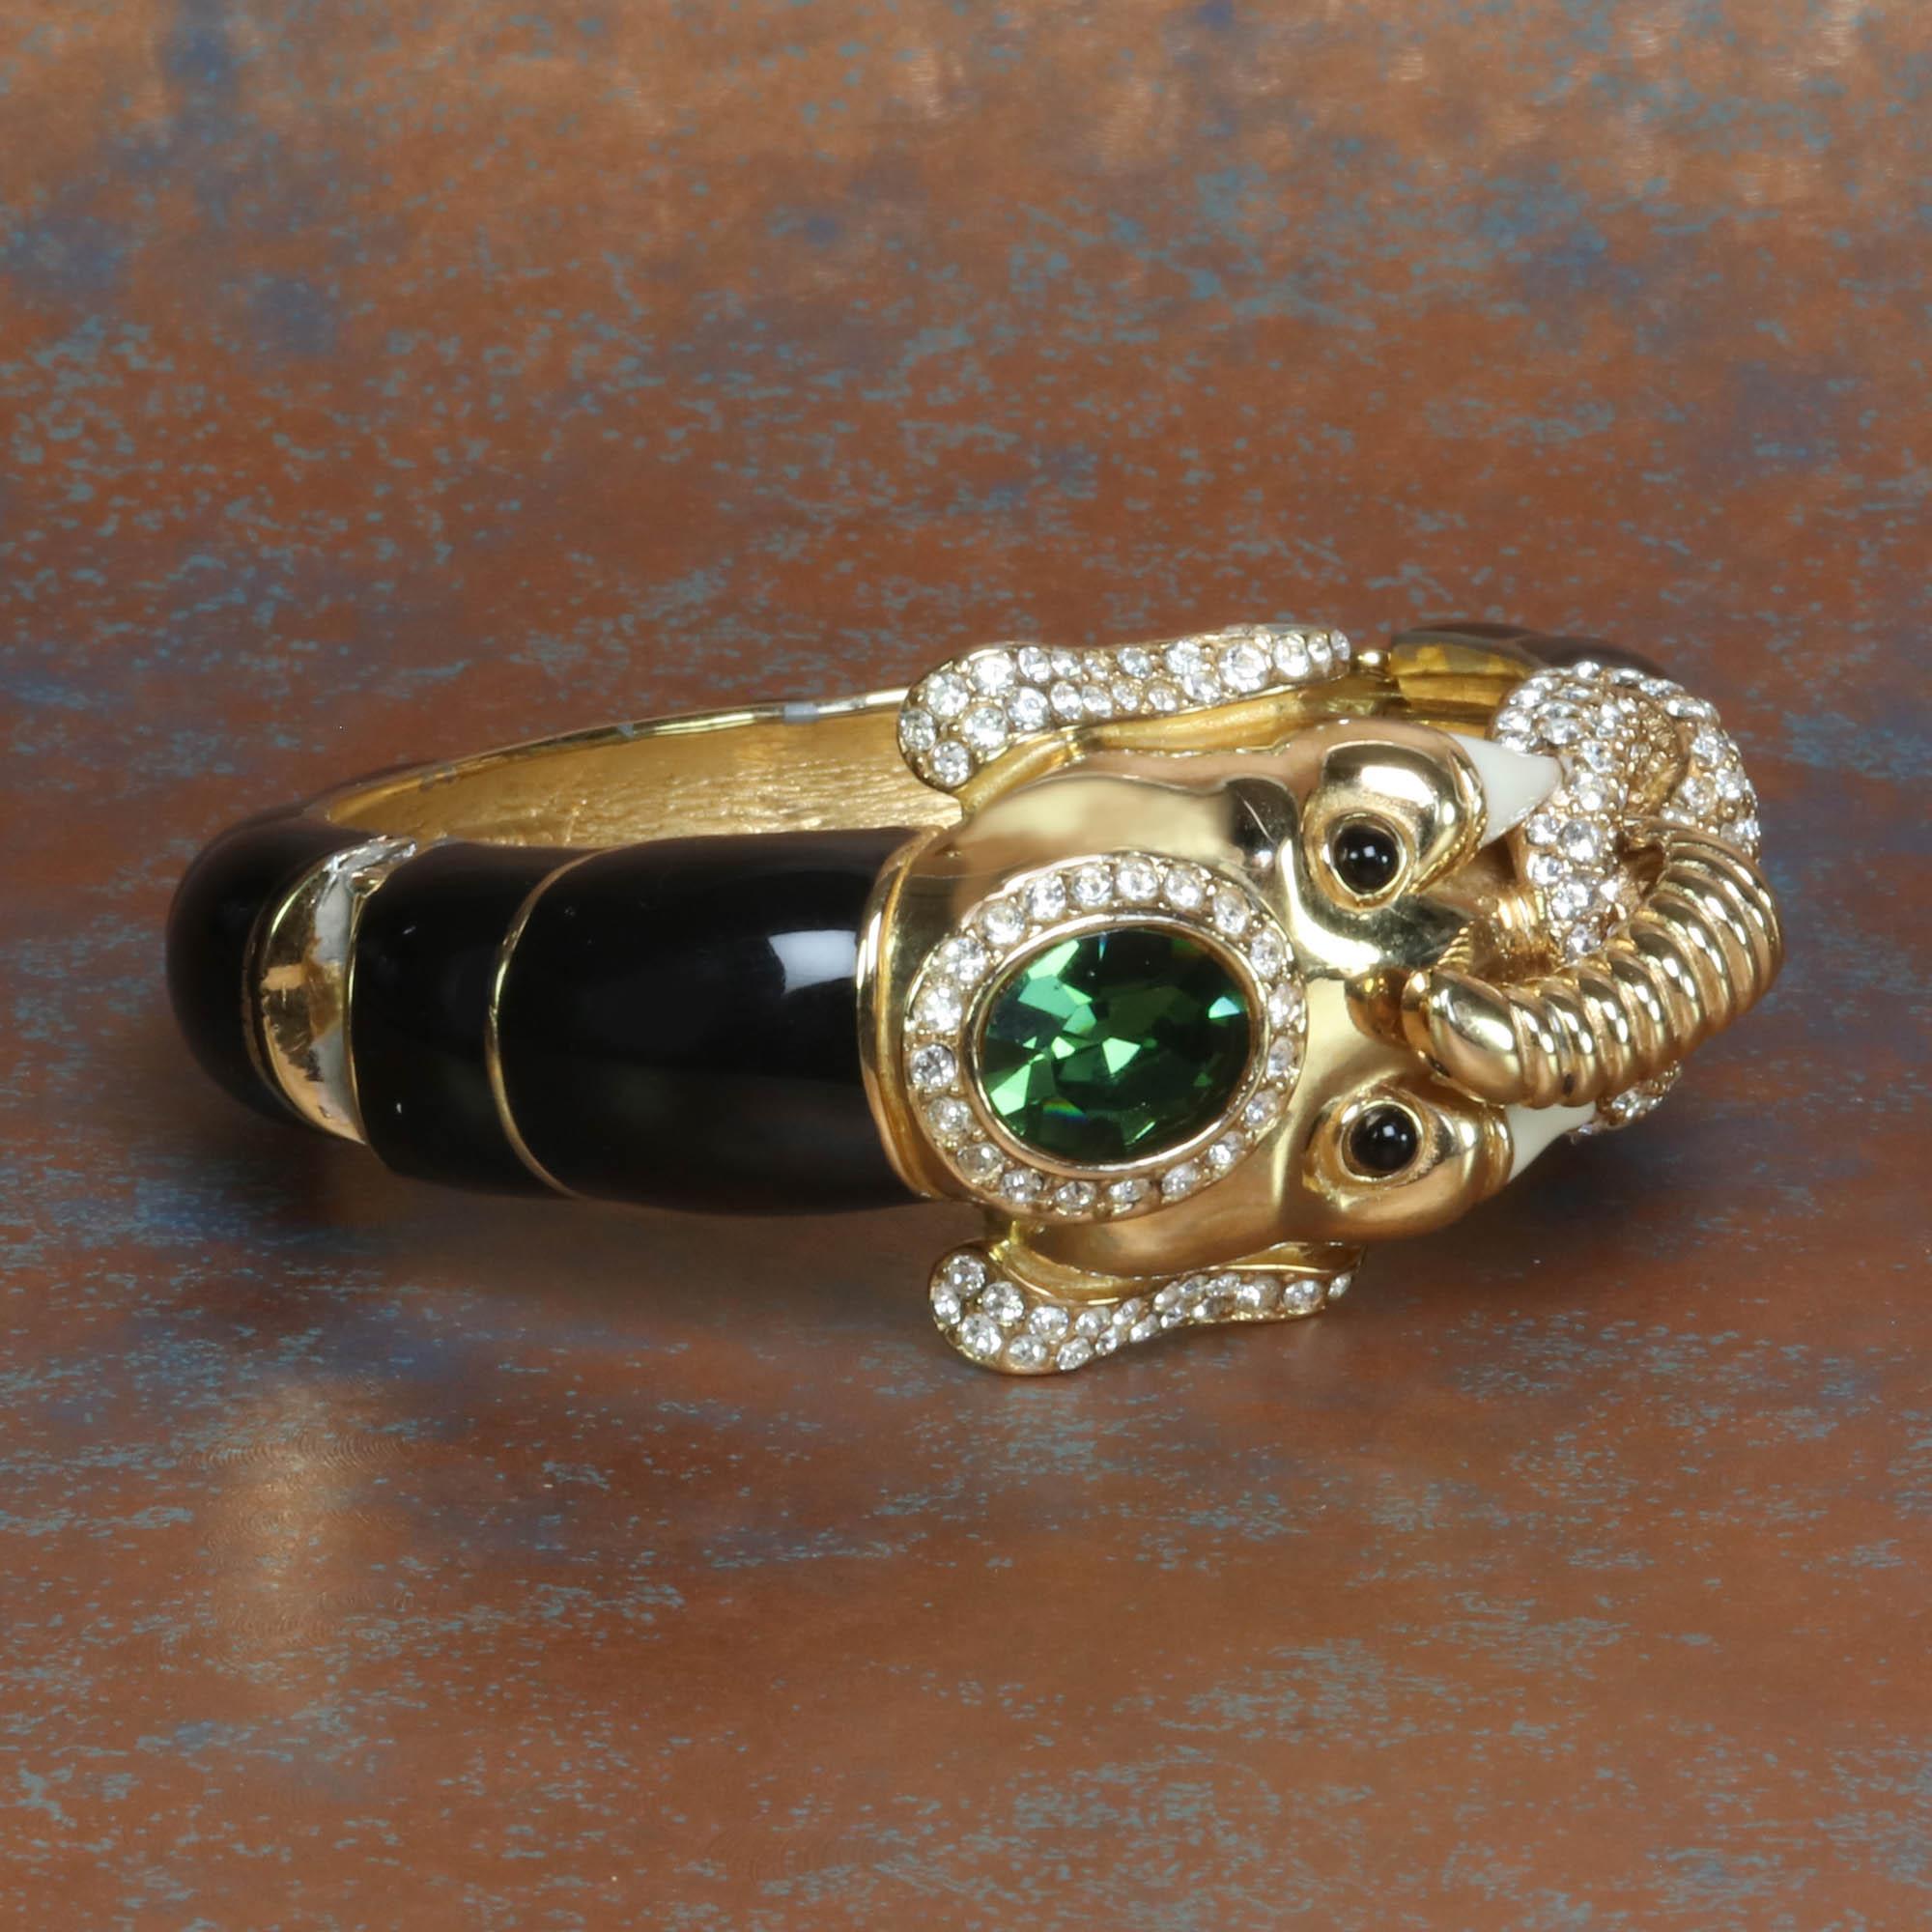 Women's or Men's CINER Elephant Animal Bracelet in Black with Faceted Green Stone For Sale